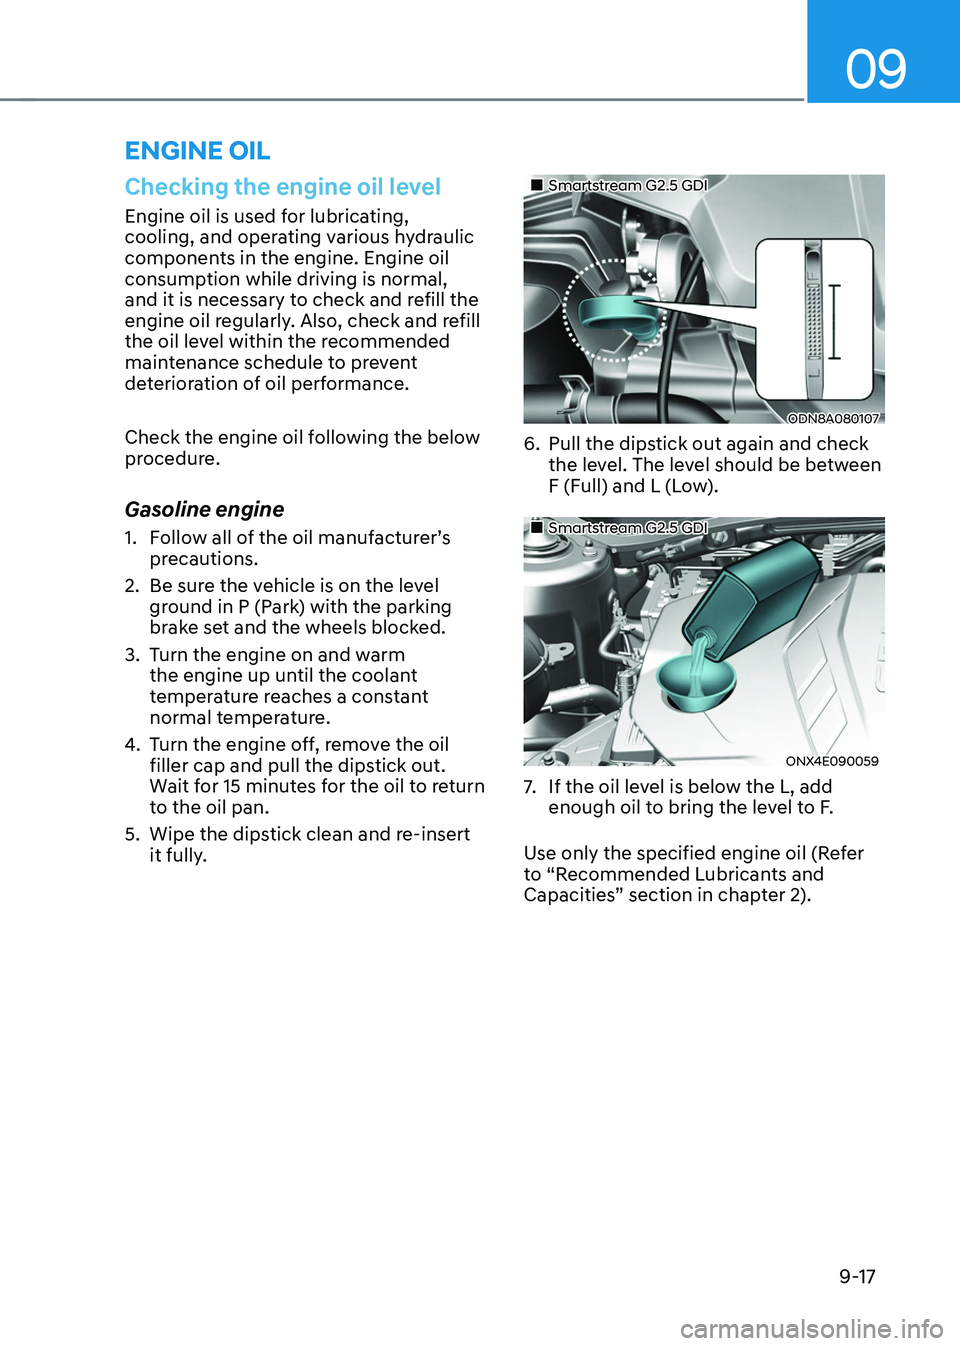 HYUNDAI TUCSON 2022 User Guide 09
9-17
ENGINE OIL
Checking the engine oil level
Engine oil is used for lubricating, 
cooling, and operating various hydraulic 
components in the engine. Engine oil 
consumption while driving is norma